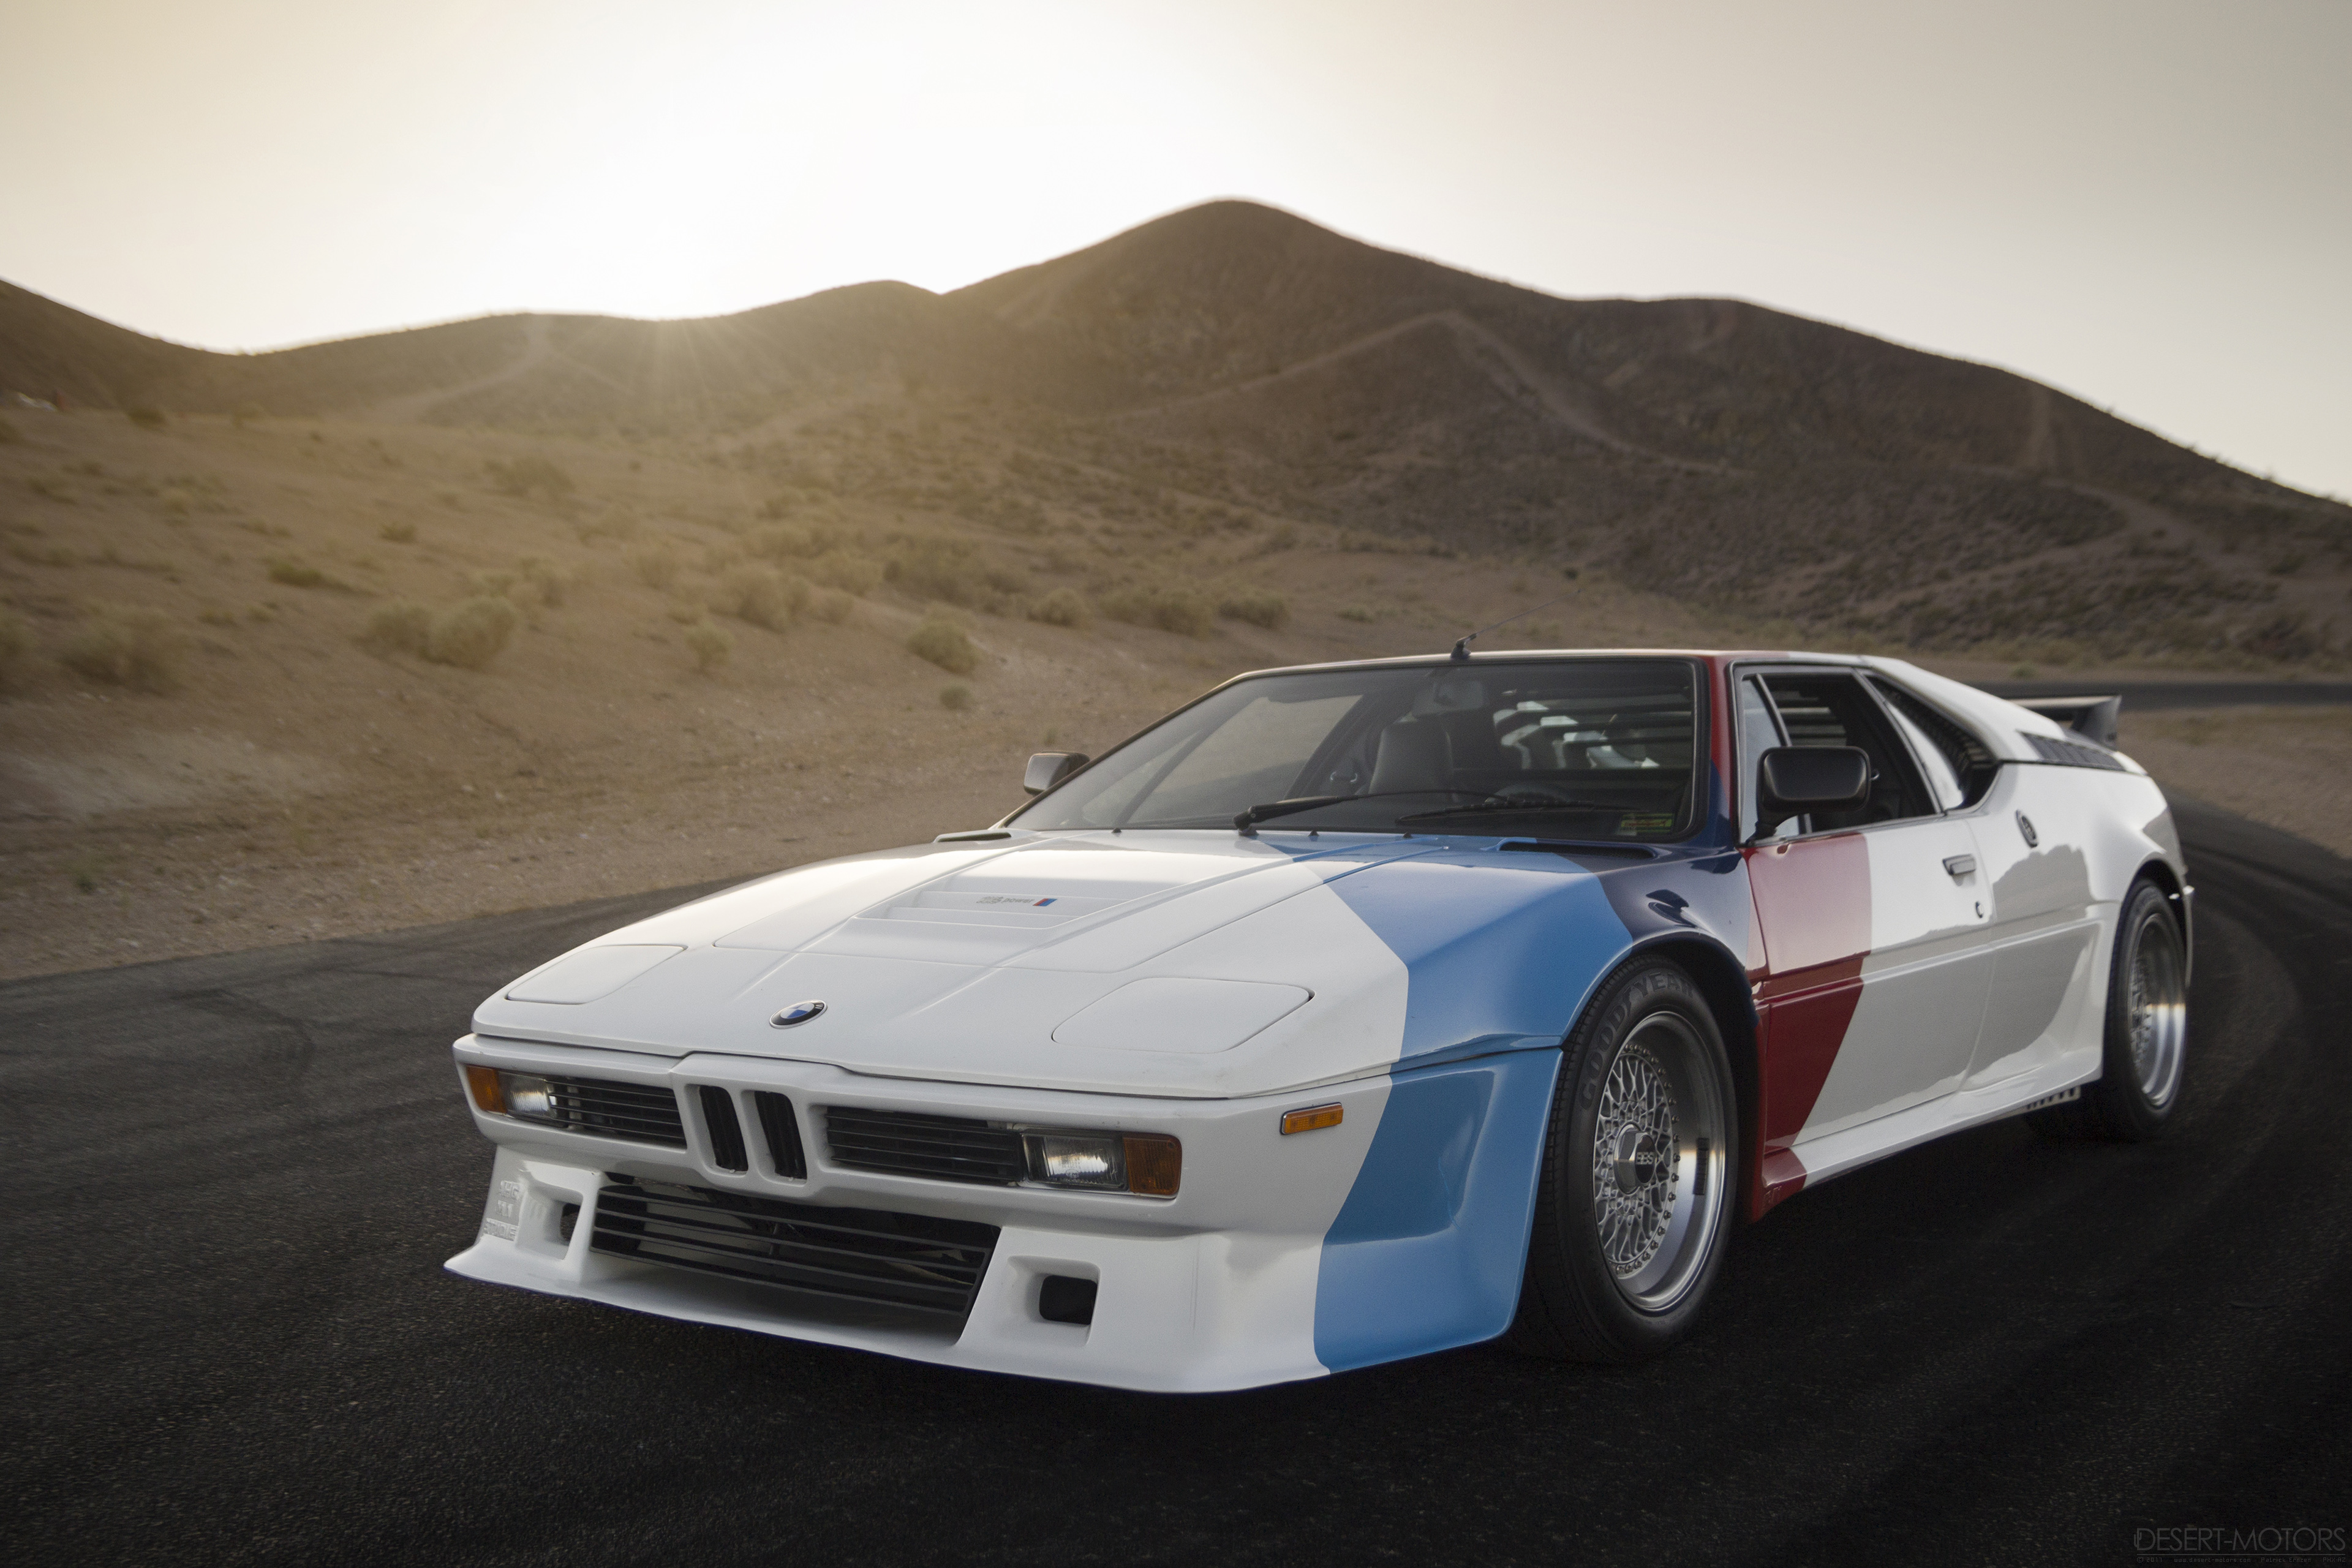 General 3840x2560 BMW M1 white cars race cars race tracks desert racing stripes pop-up headlights BMW German cars livery sunlight frontal view headlights hills watermarked vehicle car